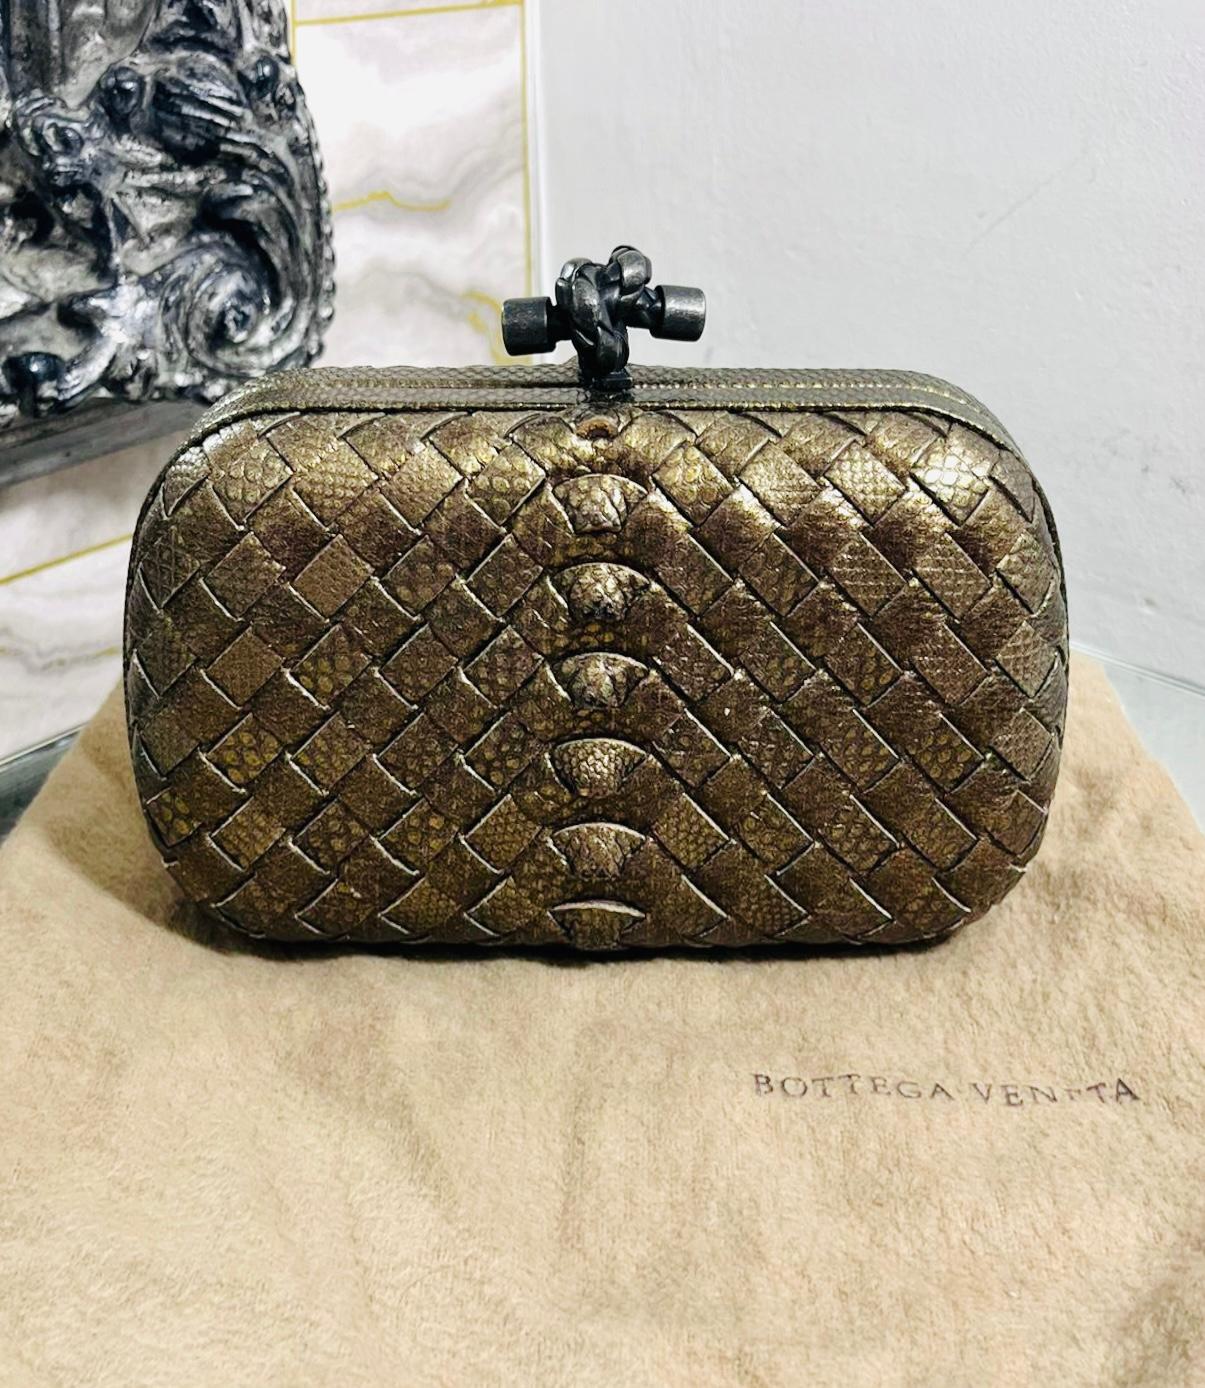 Bottega Veneta Snakeskin Top Knot Clutch Bag

Structured, bronze gold bag designed with the brand's signature Intrecciato weave crafted from snakeskin leather.

Featuring black palladium knot twisted closure.

Size – Height 10cm, Width 16cm, Depth